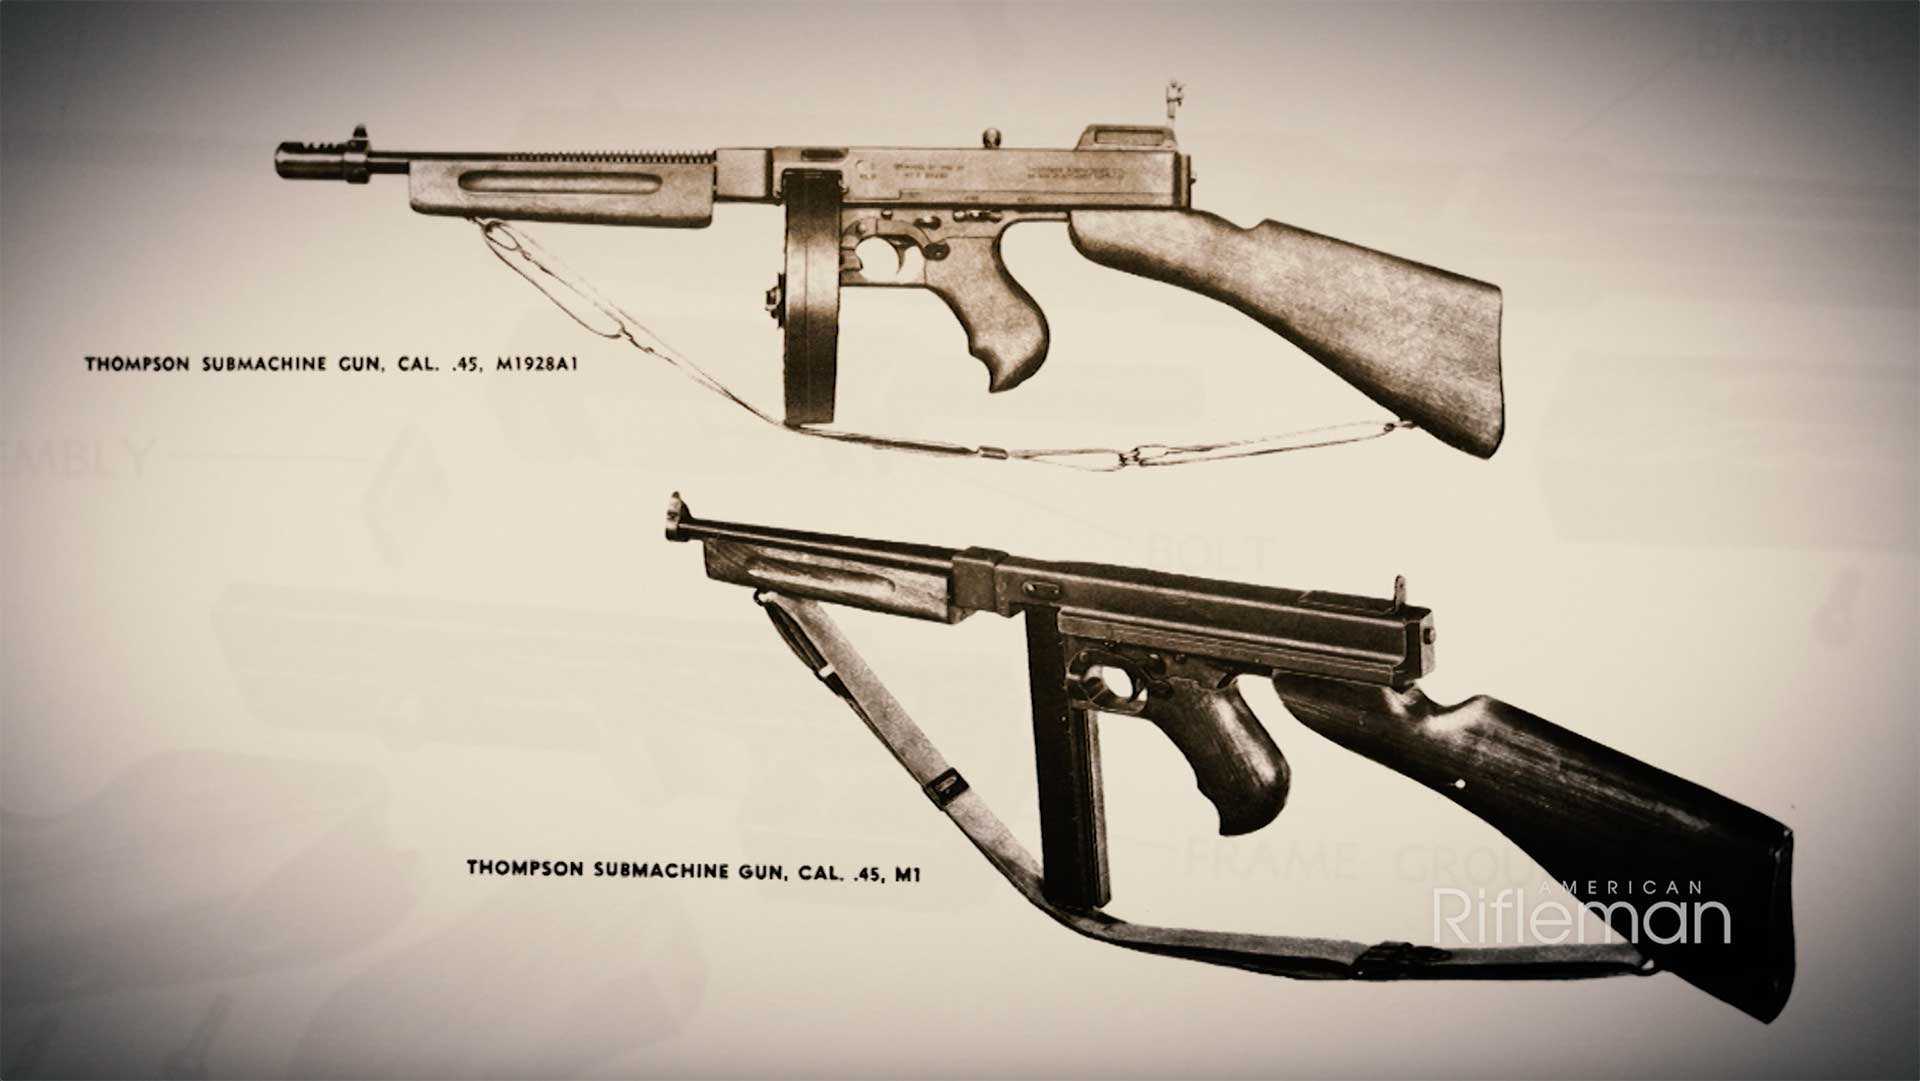 Comparison photo of the M1928A1 thompson submachine gun to the M1 Thompson at the bottom.